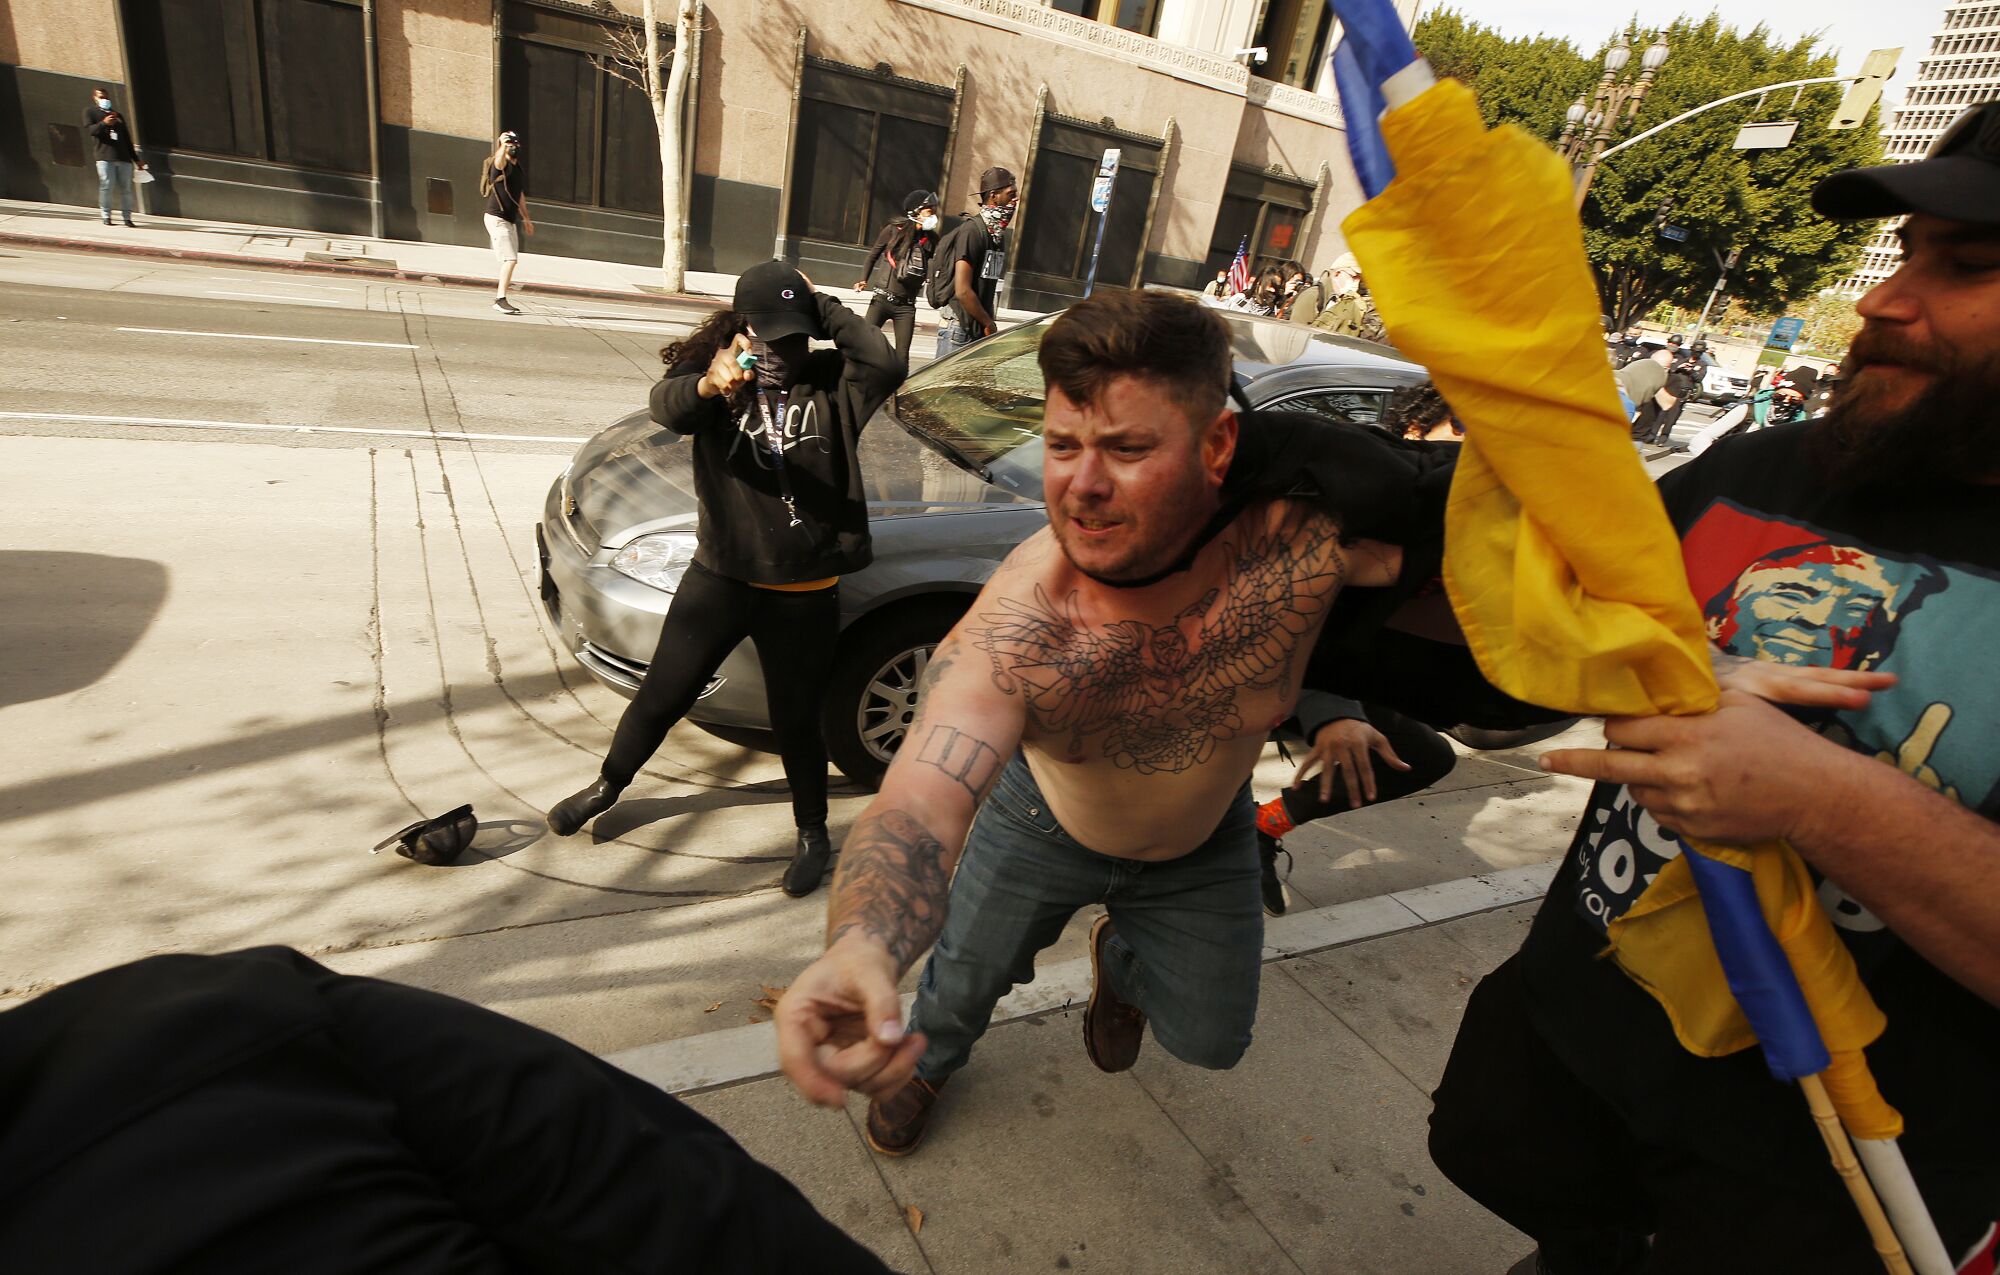 A Trump supporter, right, is punched and sprayed by counterprotesters.